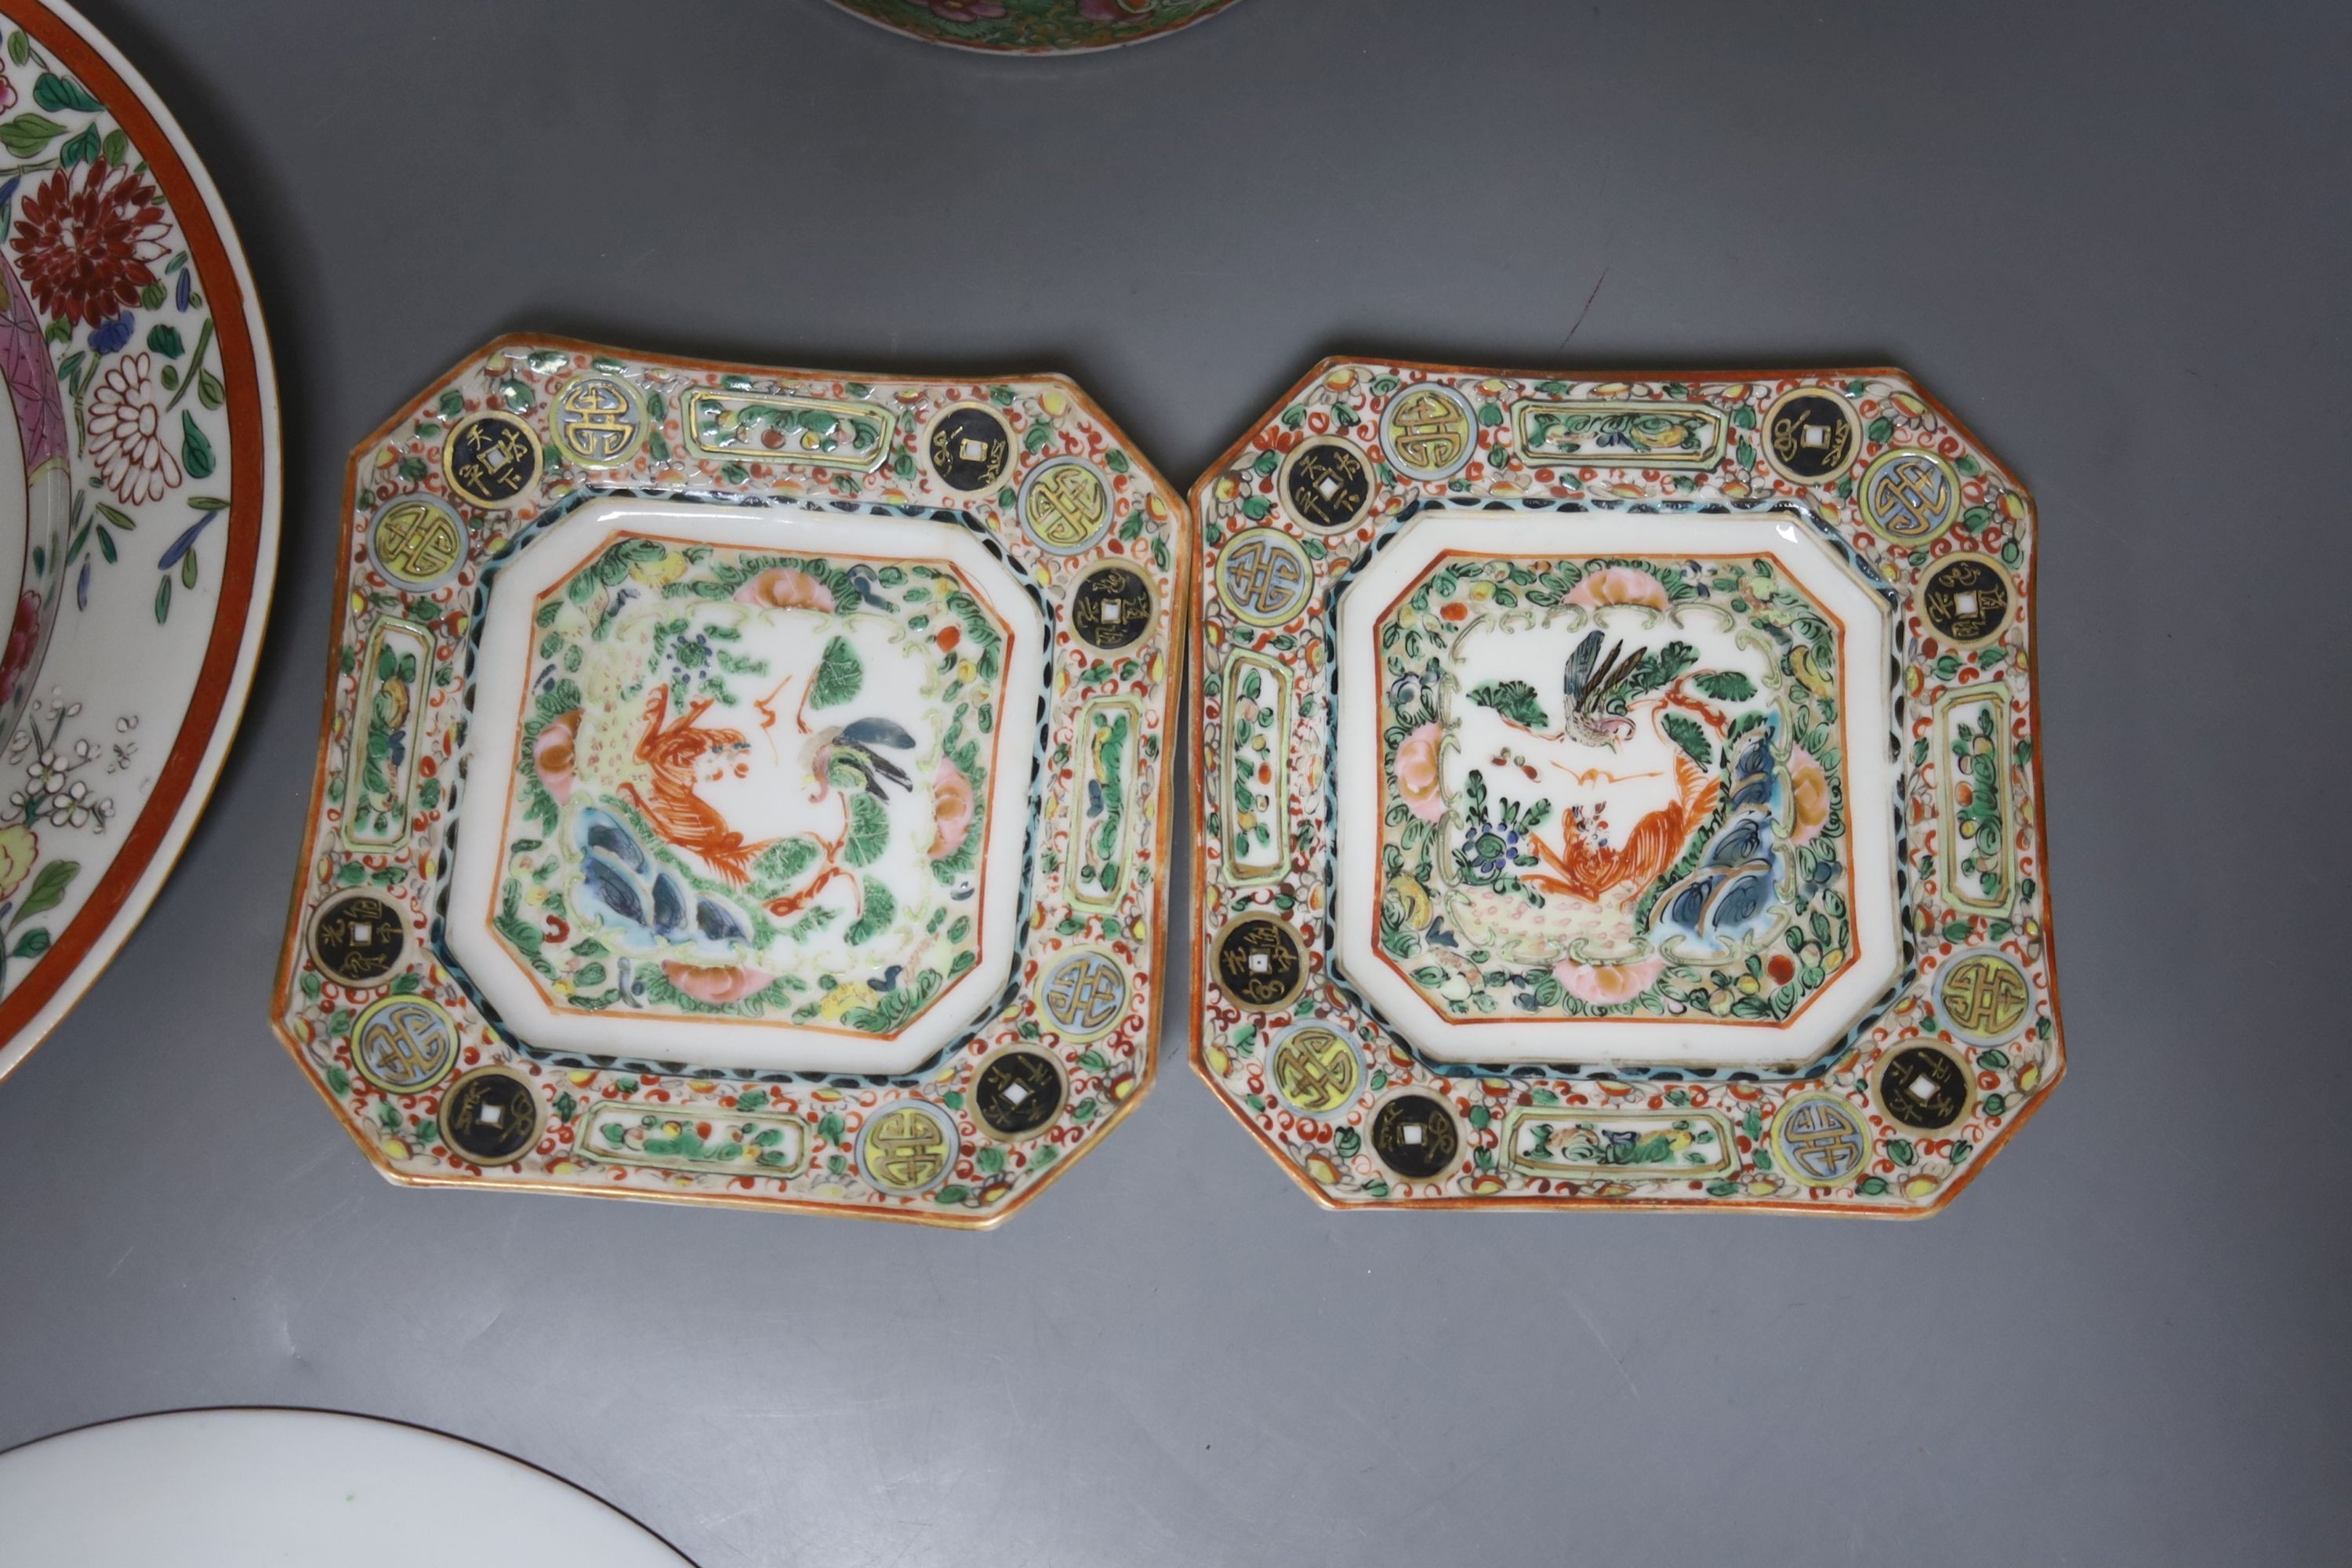 A Chinese enamelled porcelain teapot, three dishes and a Samson plate